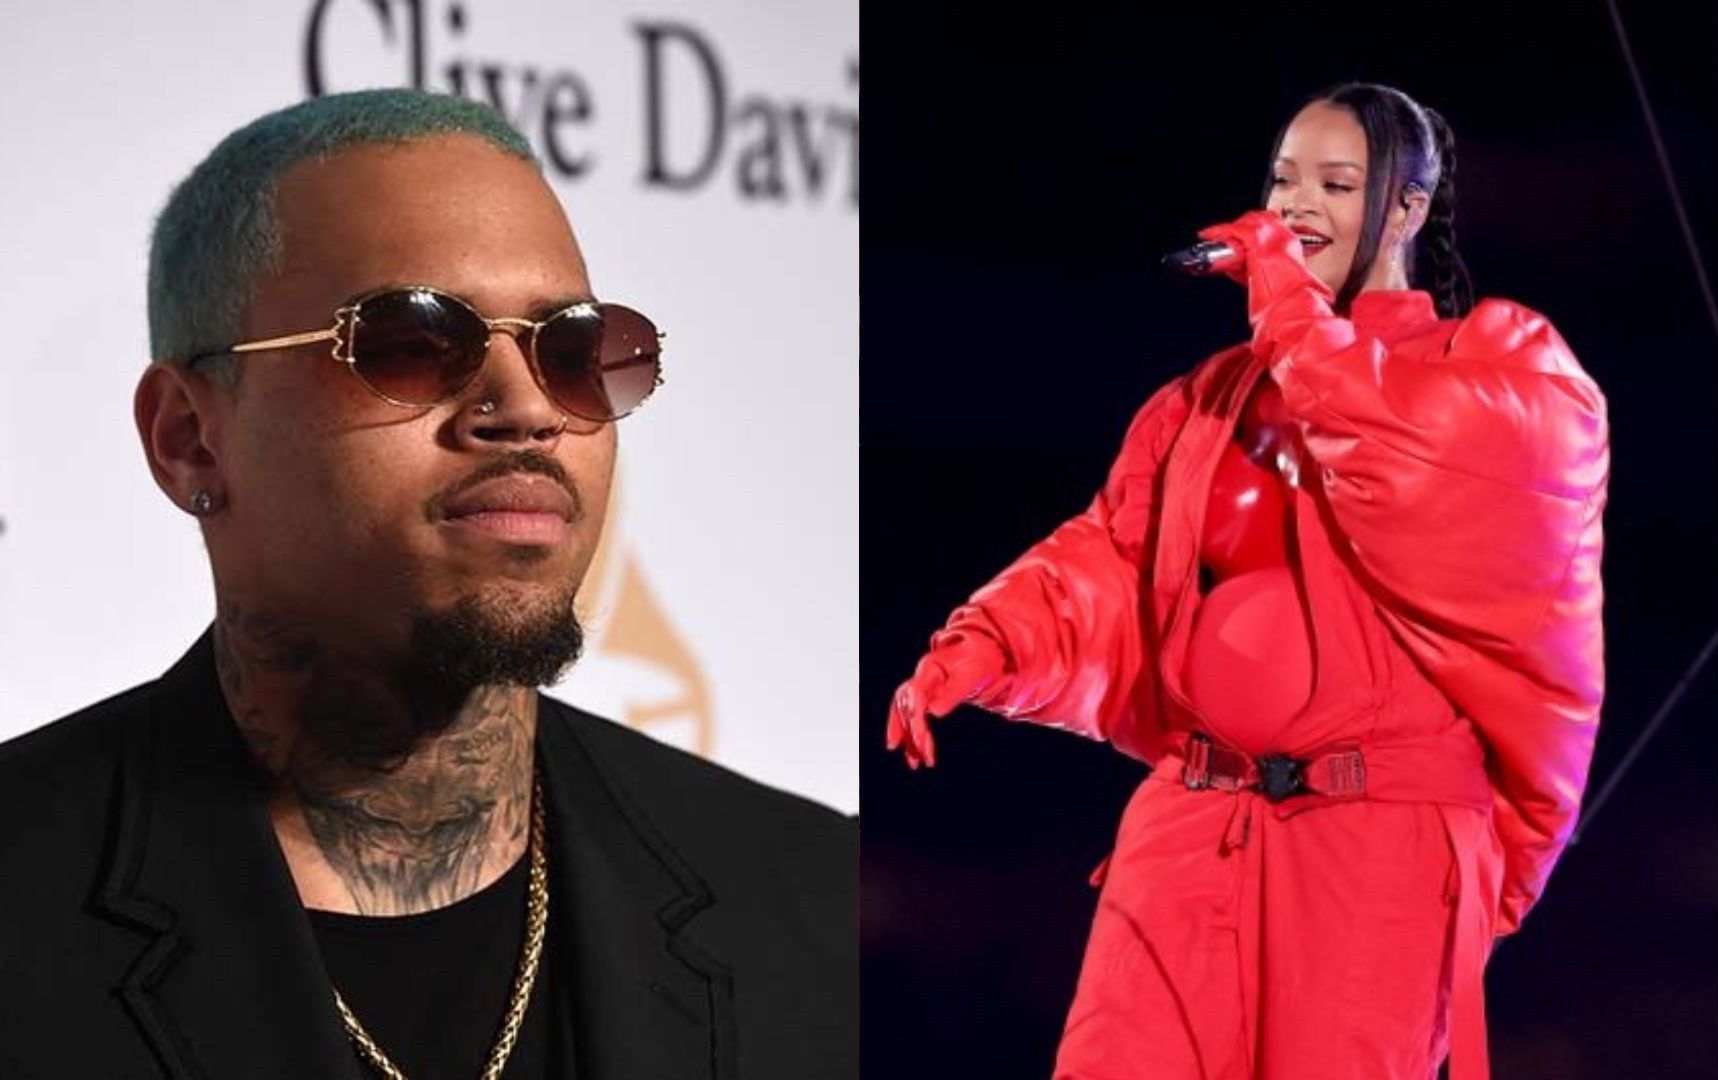 'Go Girl': Chris Brown shows support for ex Rihanna after Super Bowl performance, pregnancy reveal